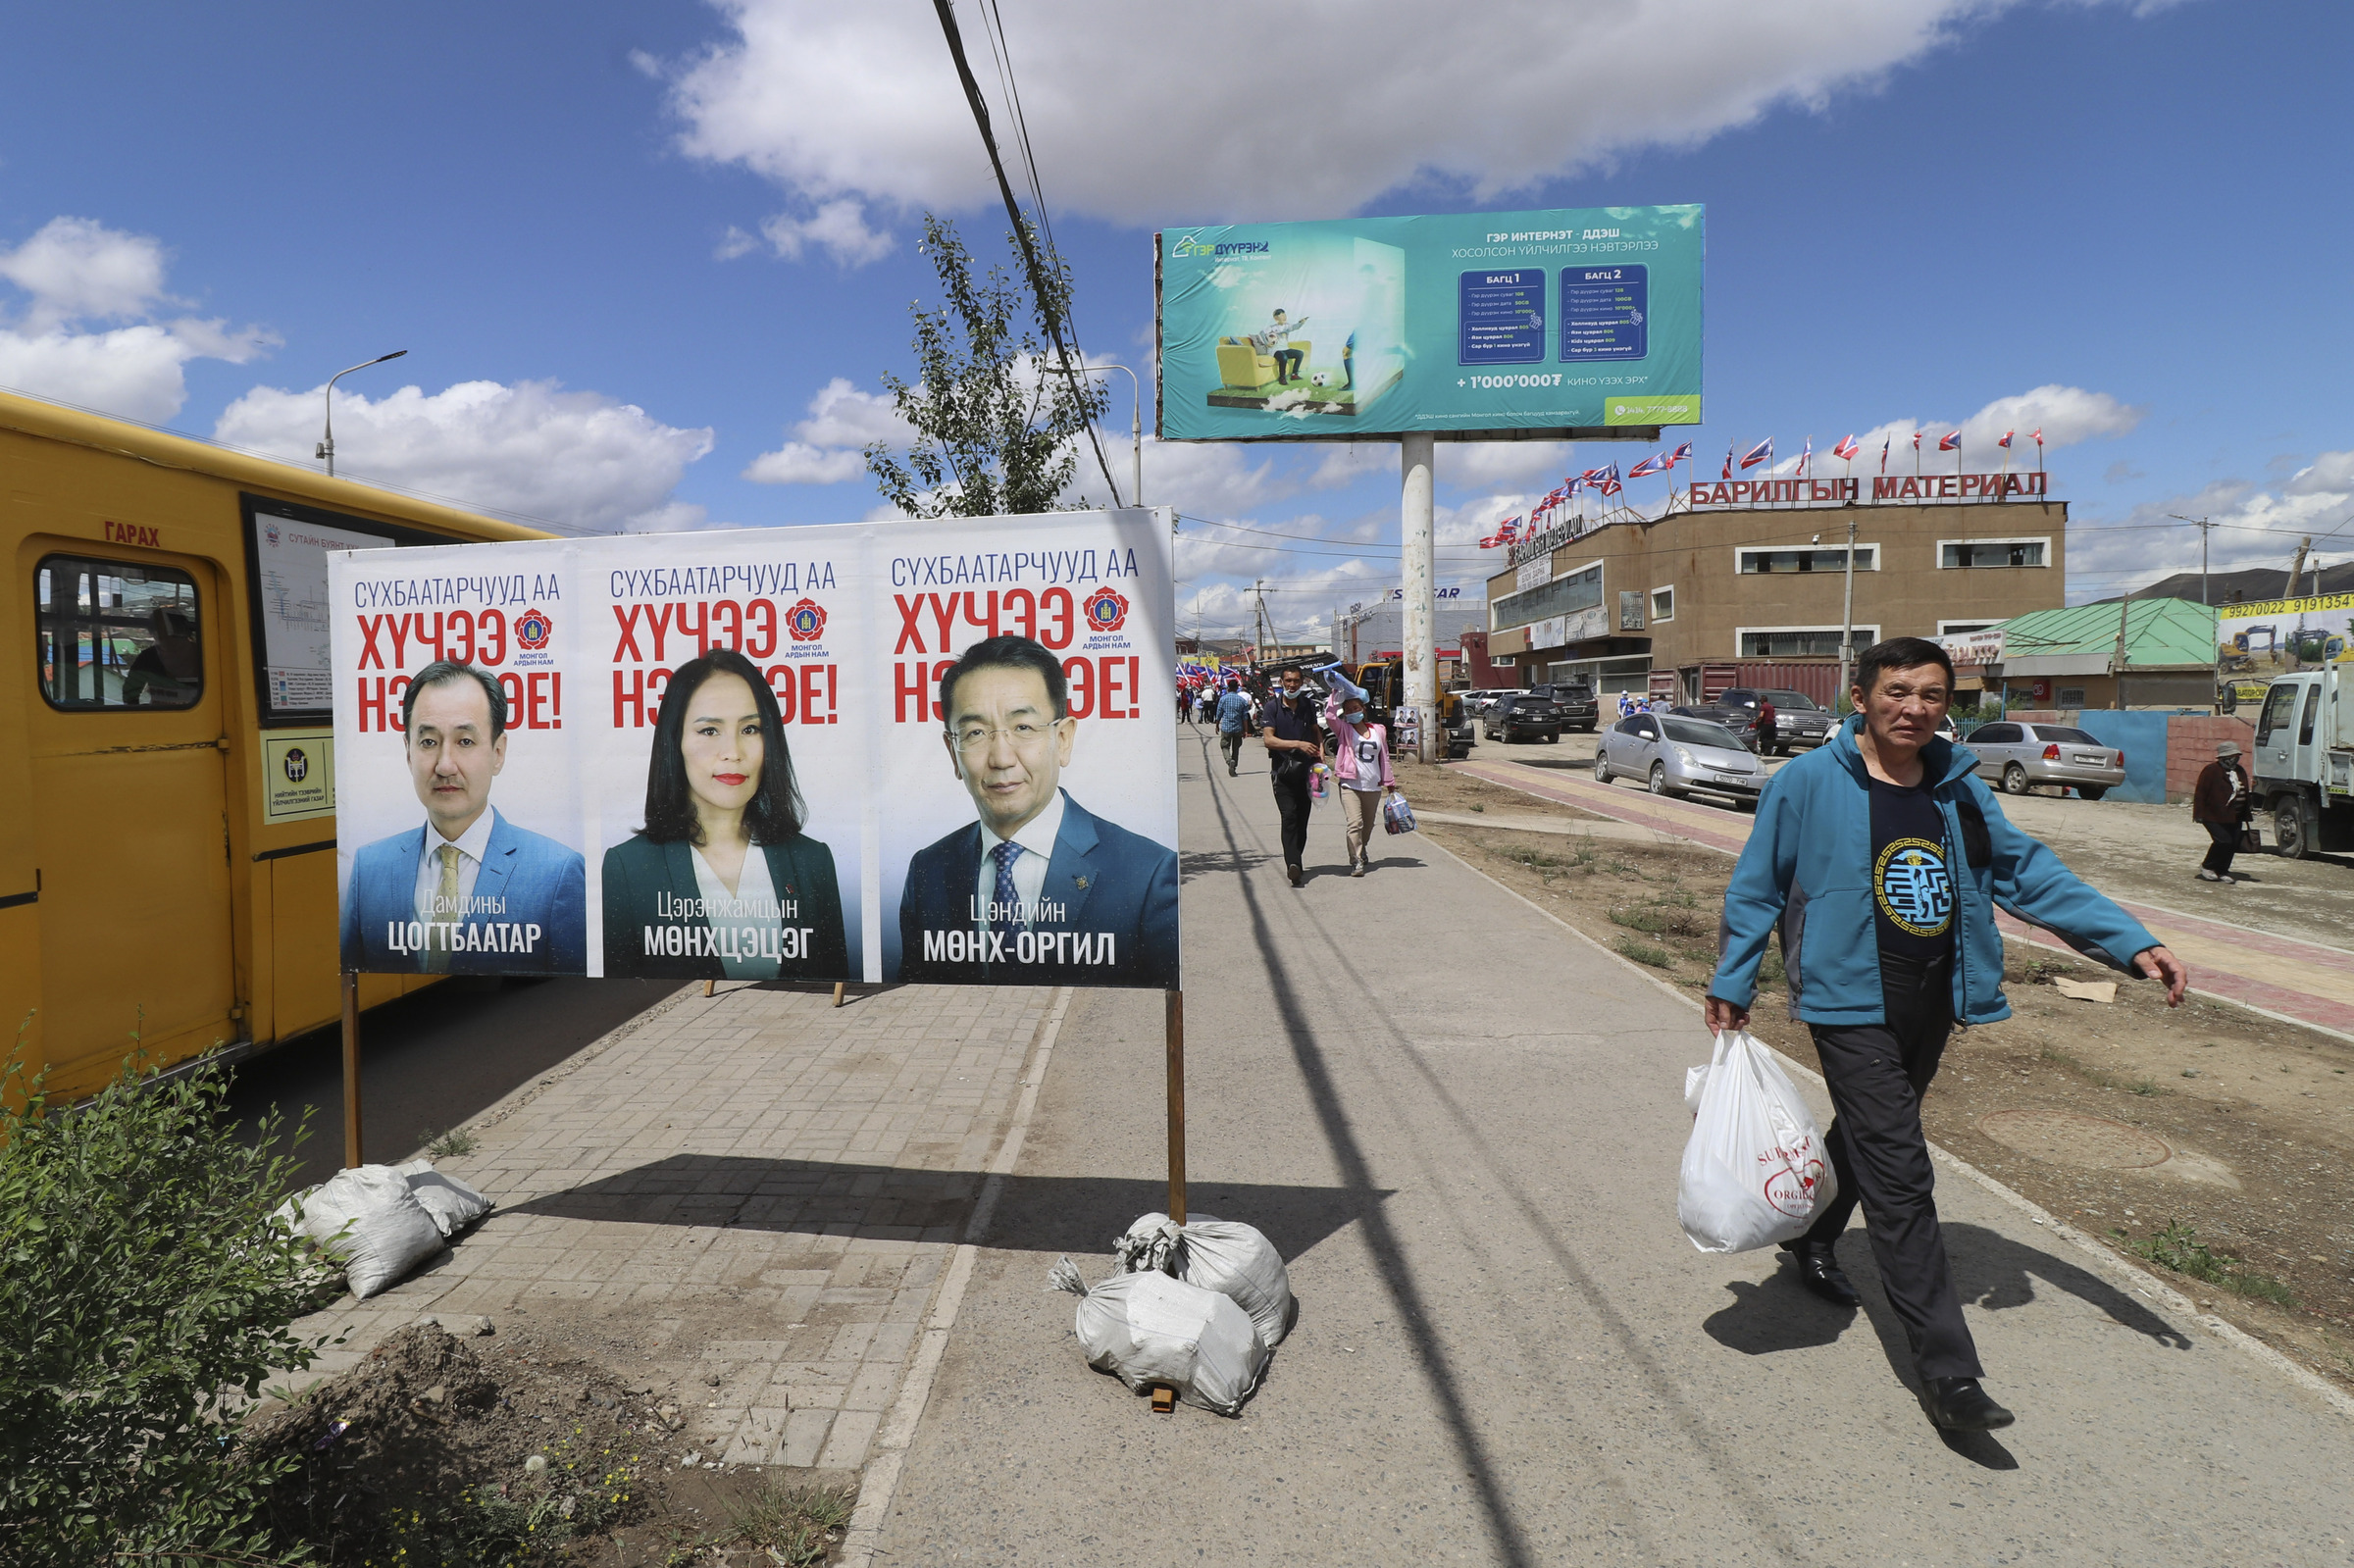 A man walks past an election poster of candidates of the ruling Mongolian People's Party (MPP) featuring current Foreign Minister Damdiny Tsogtbaatar, left, in the Chingeltei district, northern outskirts of Ulaanbaatar, Mongolia, Monday, June 22, 2020. Mongolia holds parliamentary elections on Wednesday, continuing a nearly 30-year democratic system in a vast but lightly populated country sandwiched between authoritarian regimes in Russia and China and beset by economic problems. (AP Photo/Ganbat Namjilsangarav)